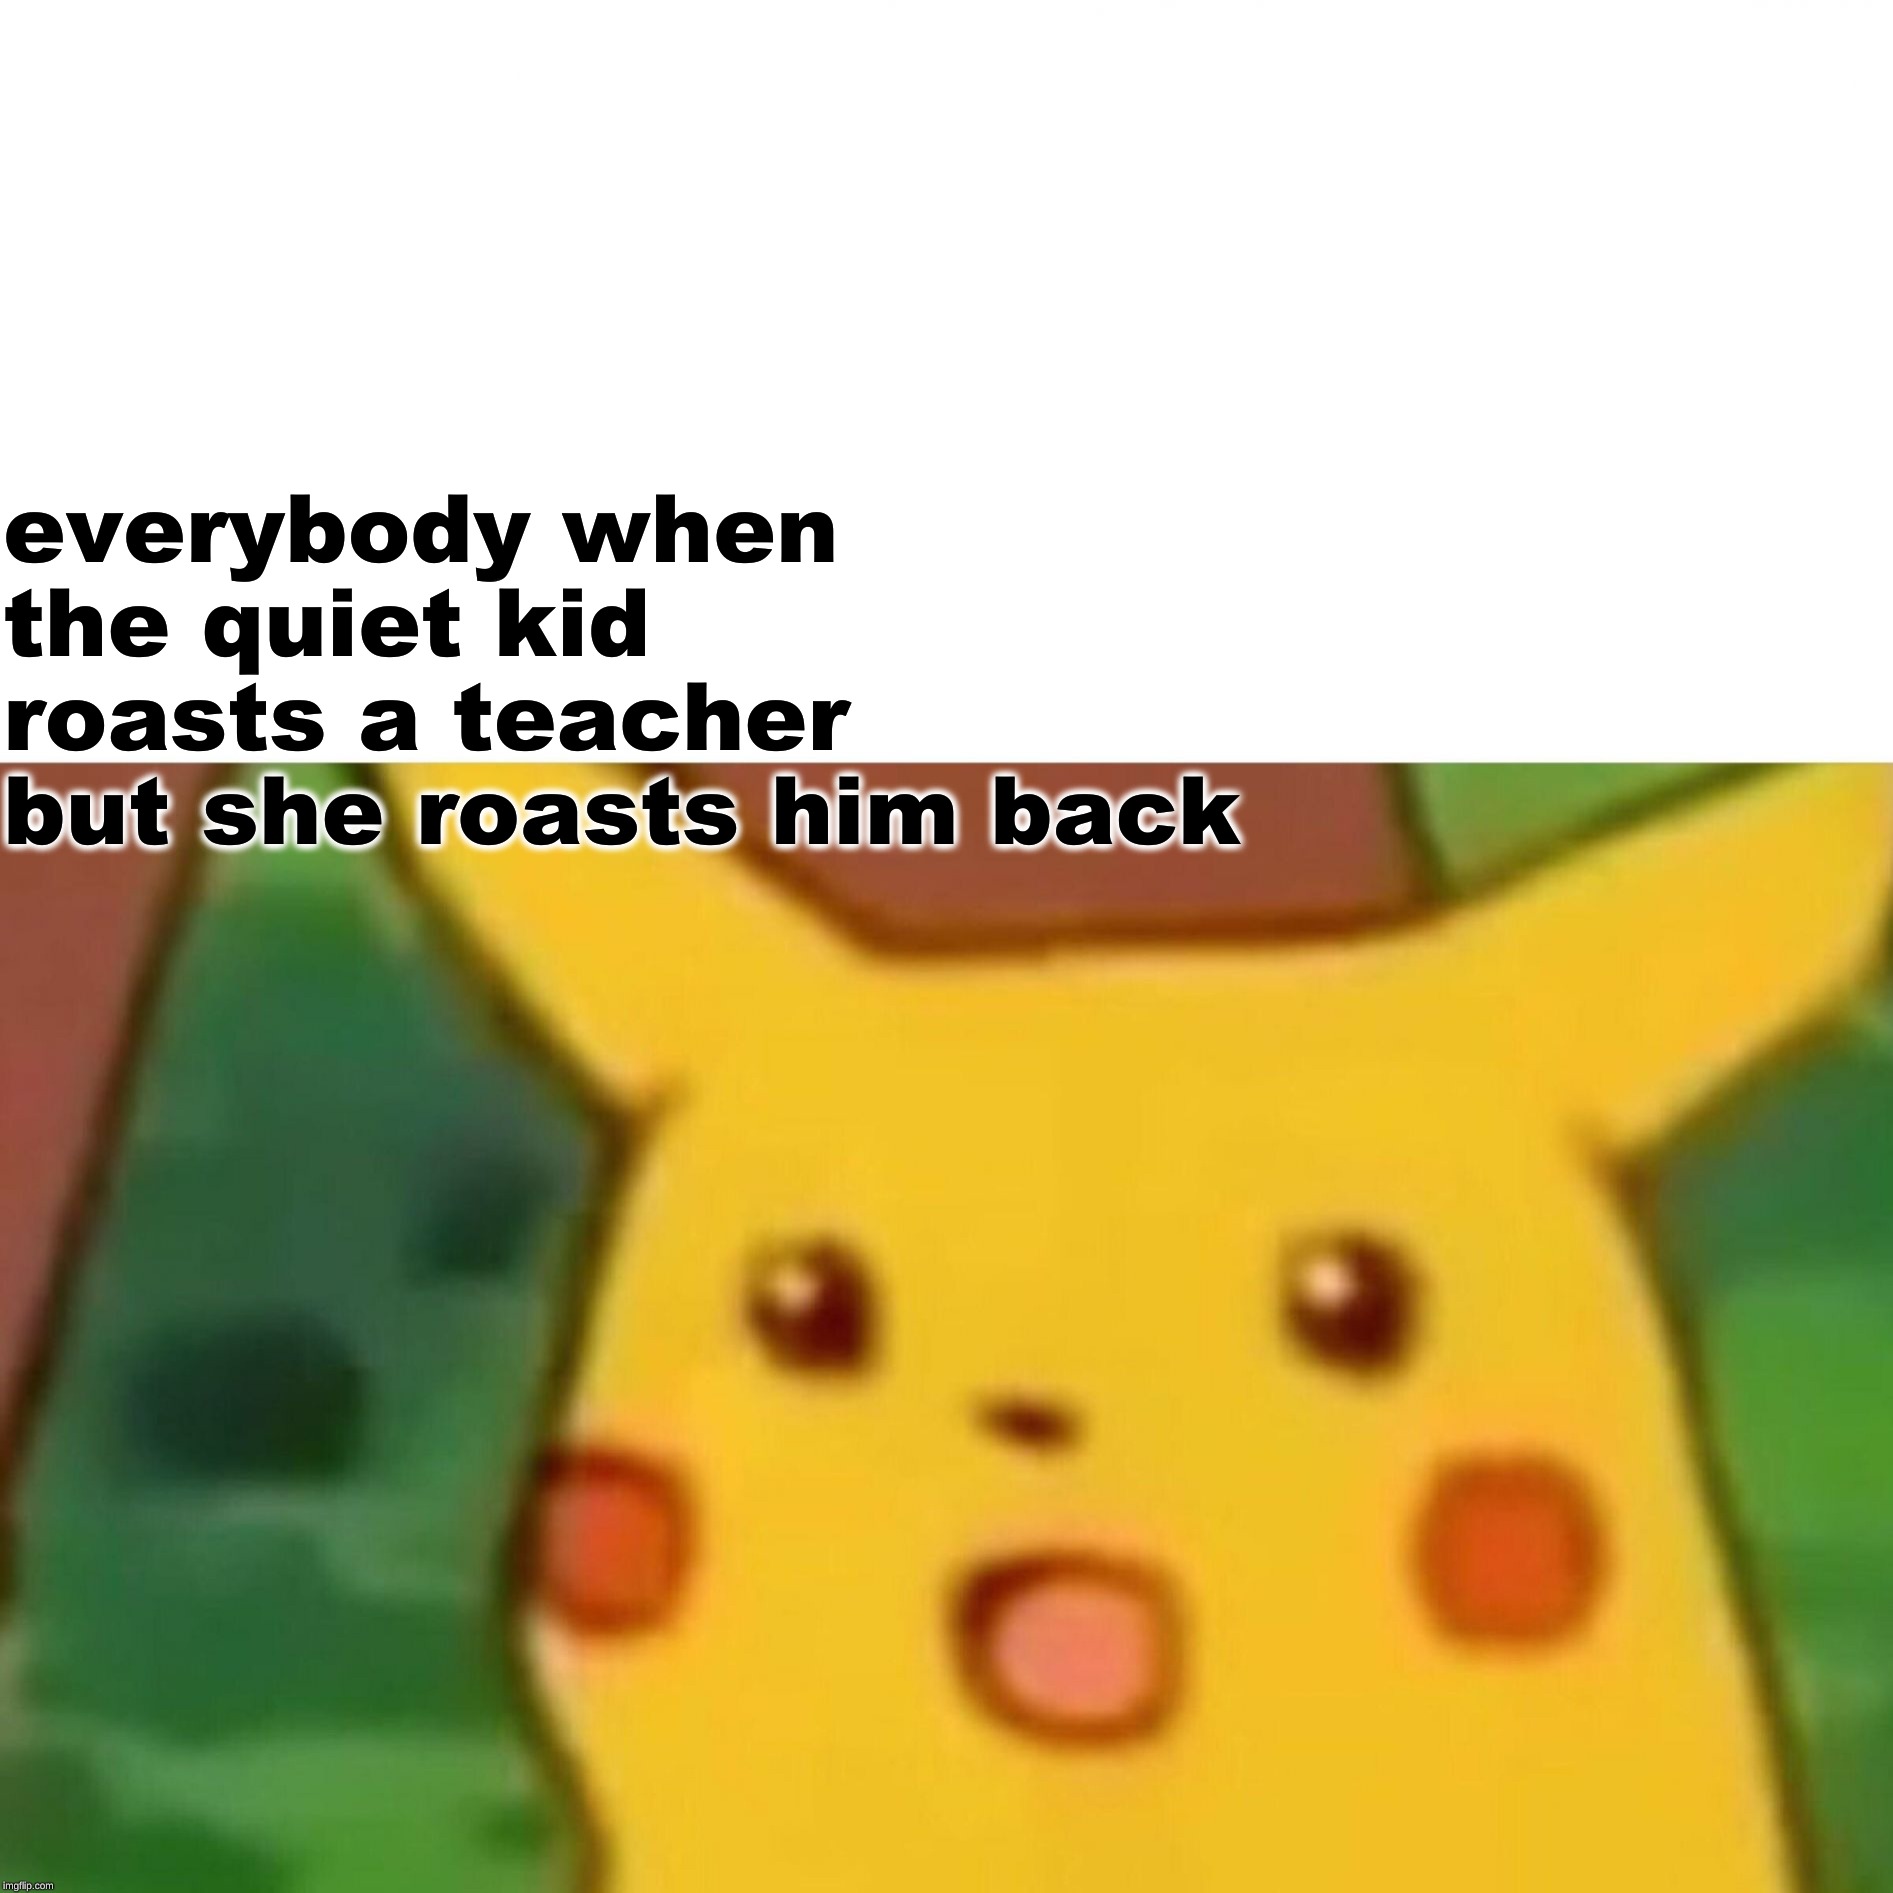 Surprised Pikachu | everybody when the quiet kid roasts a teacher but she roasts him back | image tagged in memes,surprised pikachu | made w/ Imgflip meme maker